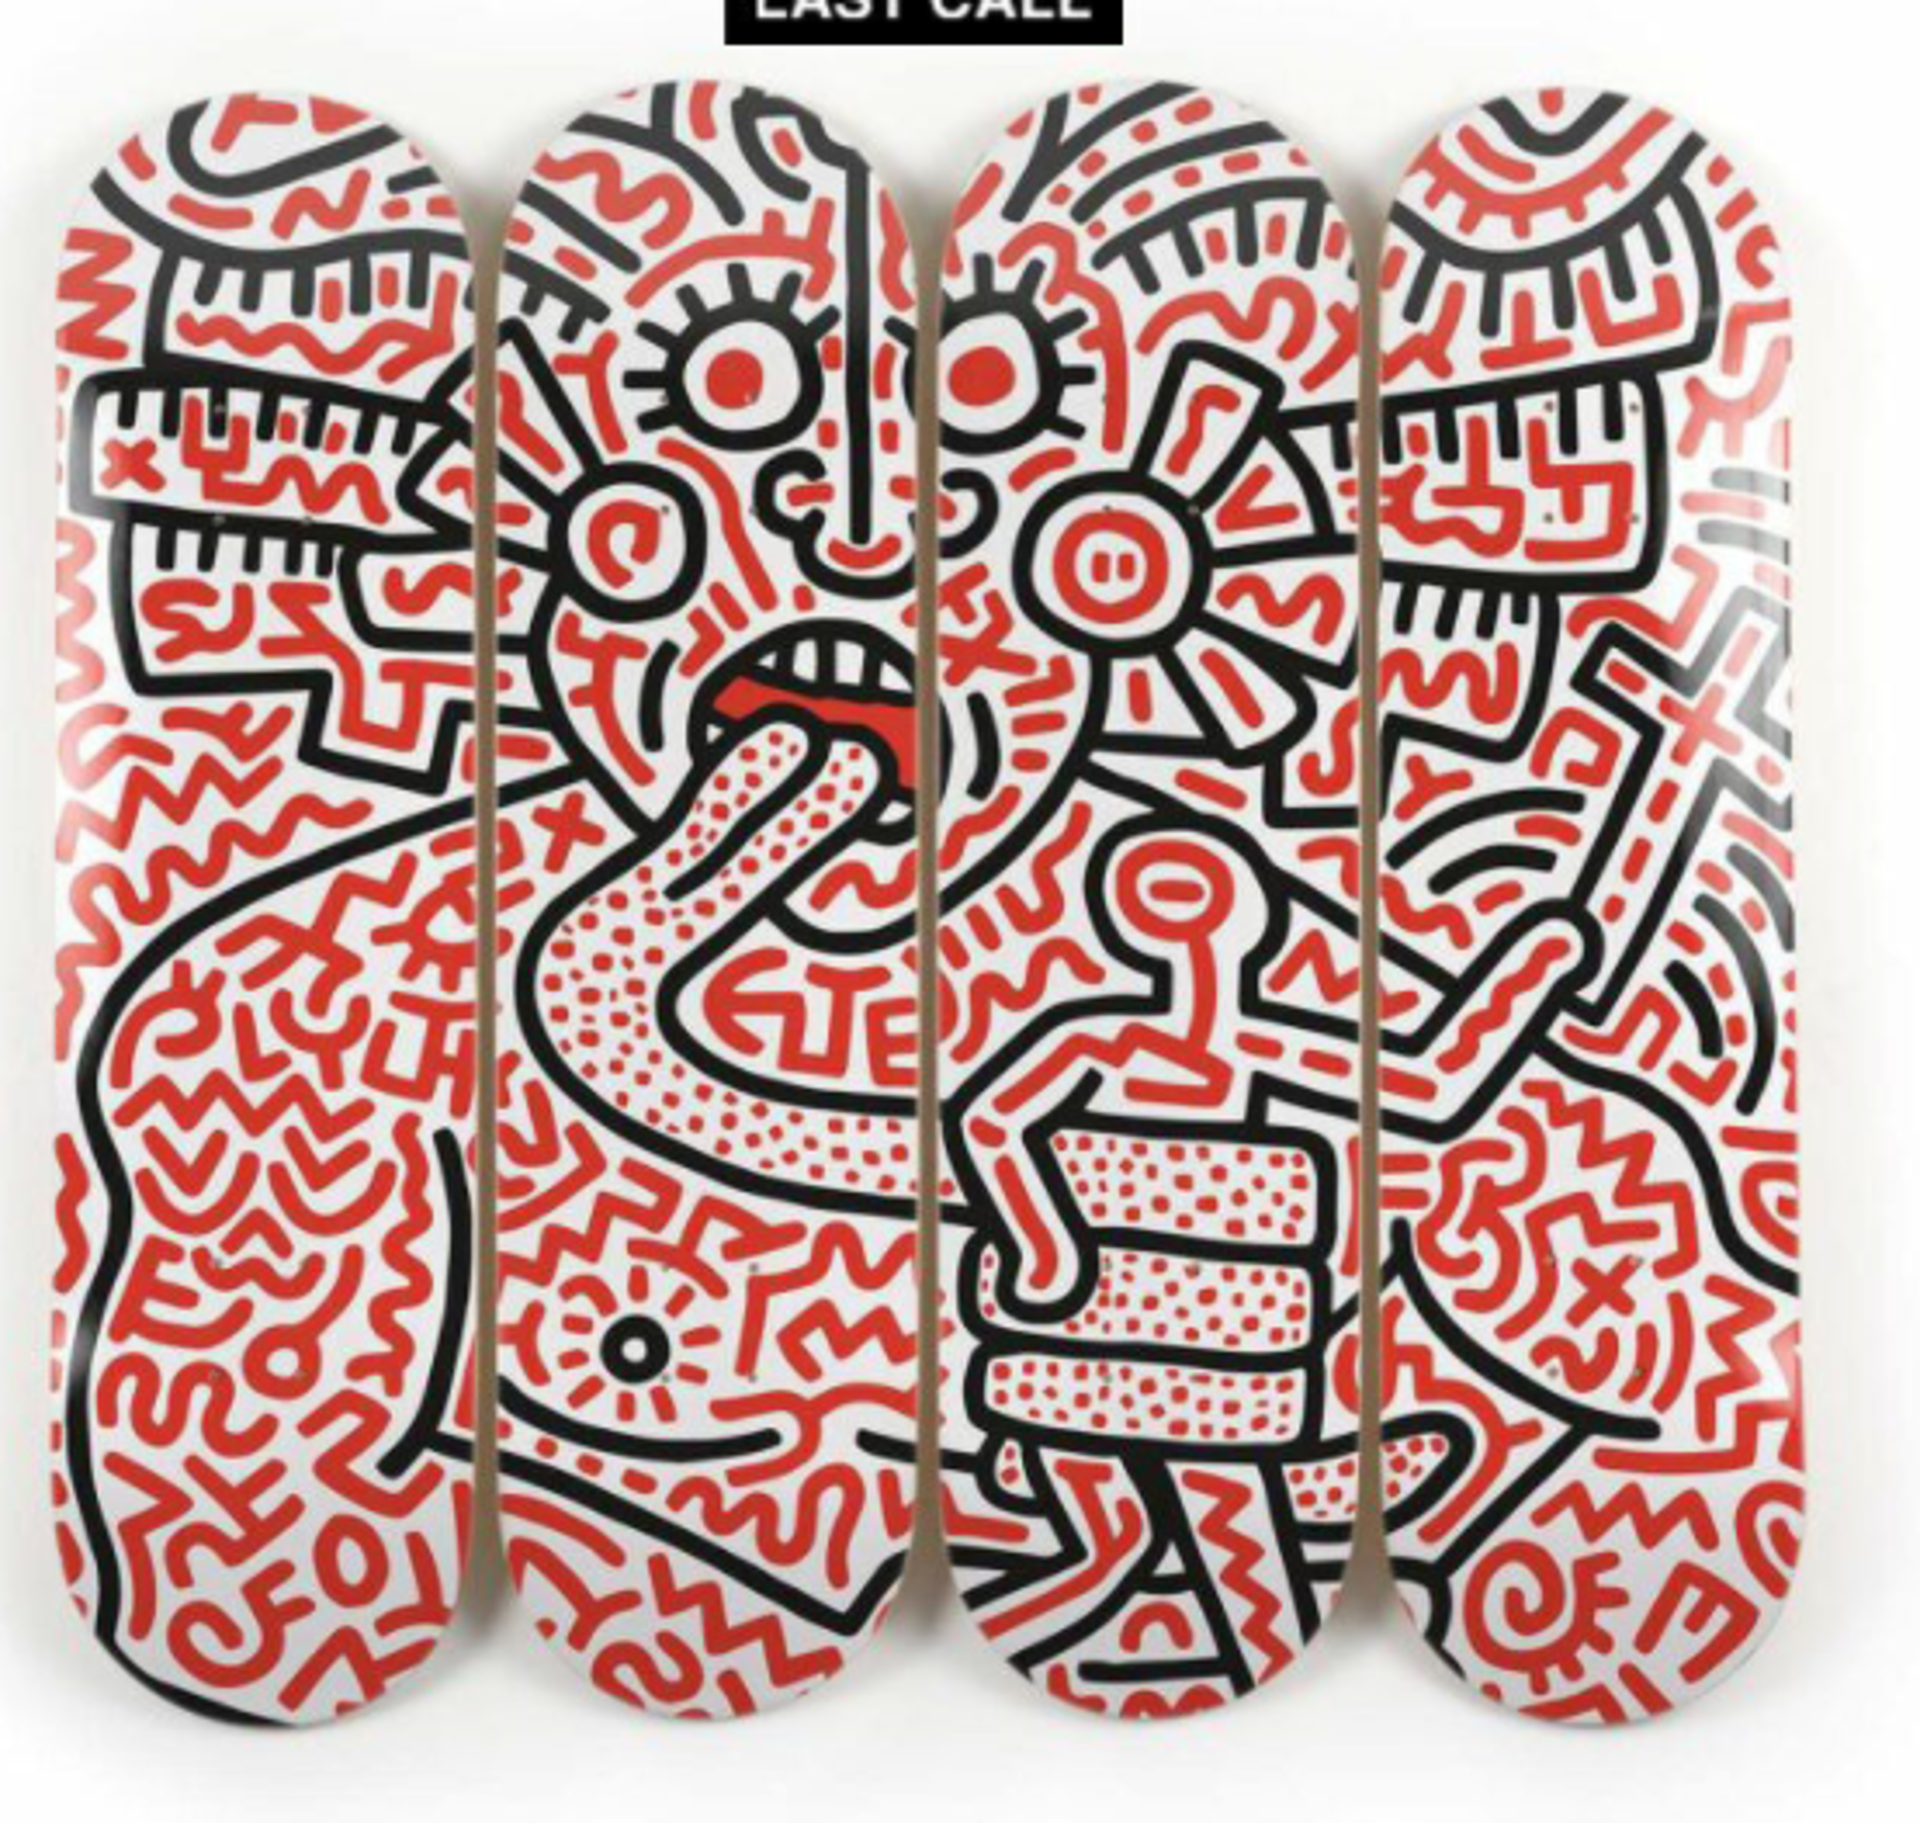 MAN AND MEDUSA / Skateboard ( set of 4 ) by Keith Haring